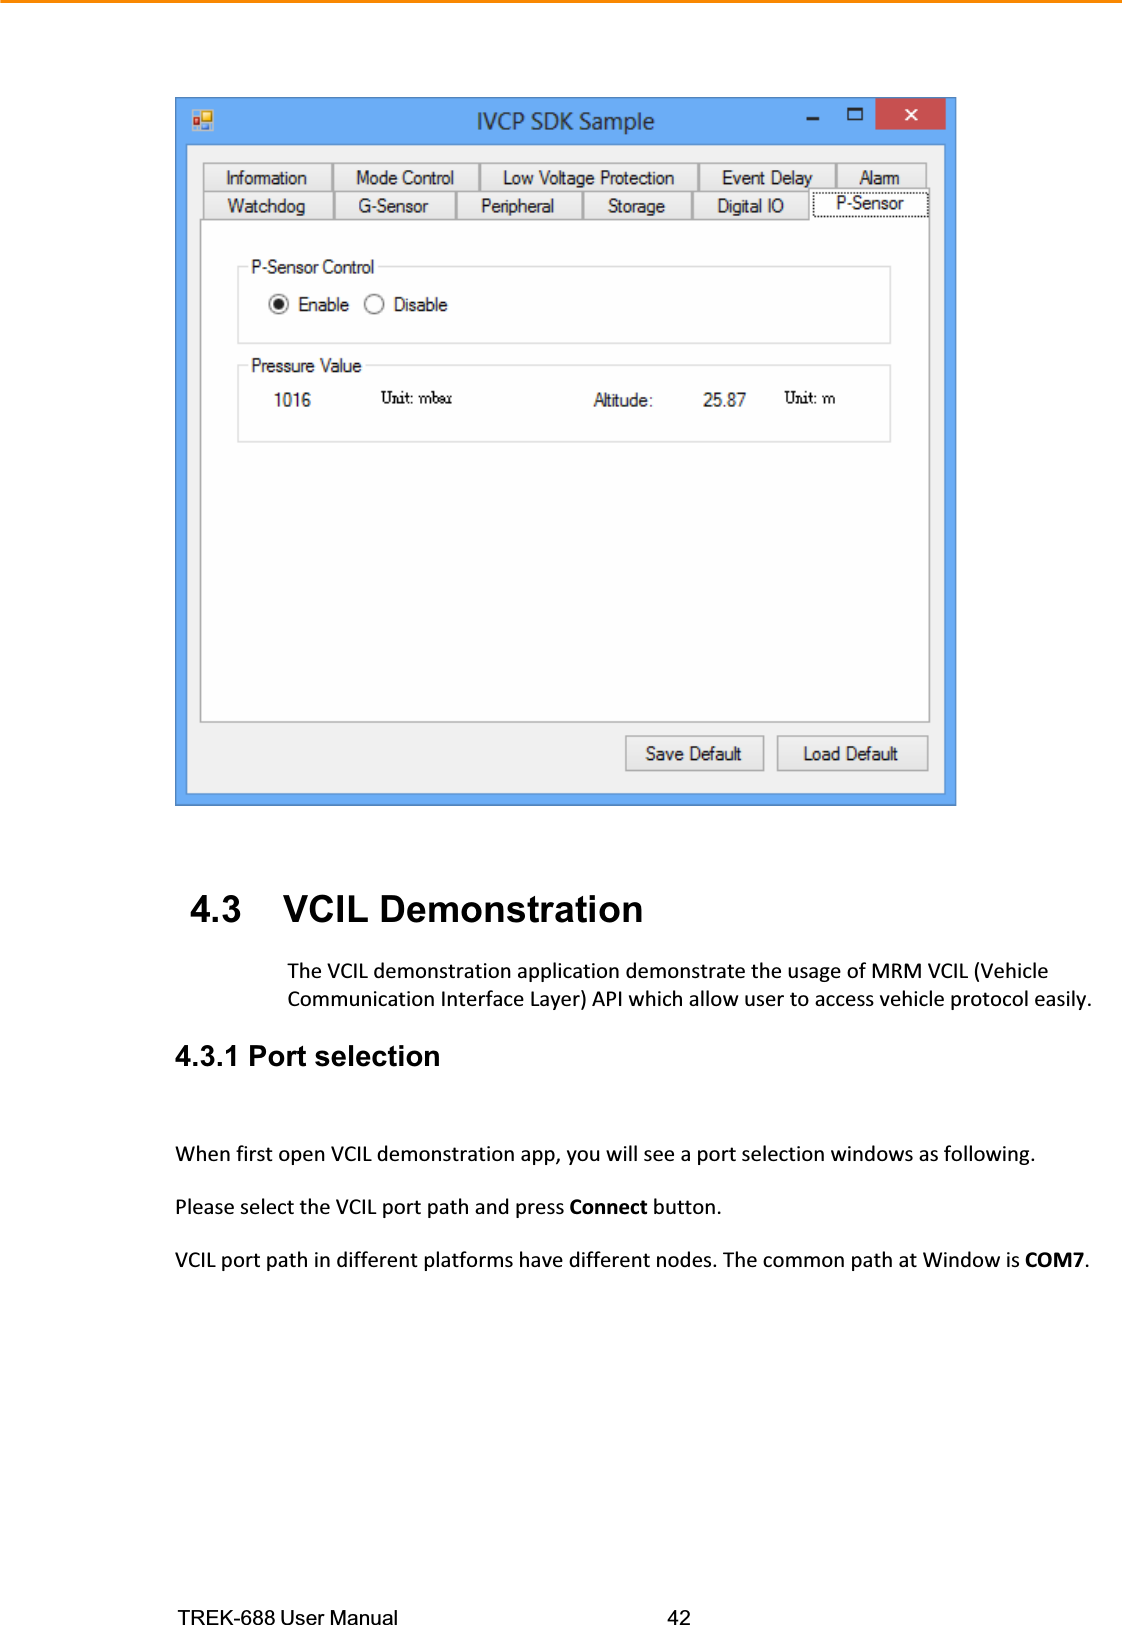 TREK-688 User Manual  42  4.3    VCIL Demonstration  TheVCILdemonstrationapplicationdemonstratetheusageofMRMVCIL(VehicleCommunicationInterfaceLayer)APIwhichallowusertoaccessvehicleprotocoleasily.  4.3.1 Port selection WhenfirstopenVCILdemonstrationapp,youwillseeaportselectionwindowsasfollowing.PleaseselecttheVCILportpathandpressConnectbutton.VCILportpathindifferentplatformshavedifferentnodes.ThecommonpathatWindowisCOM7.